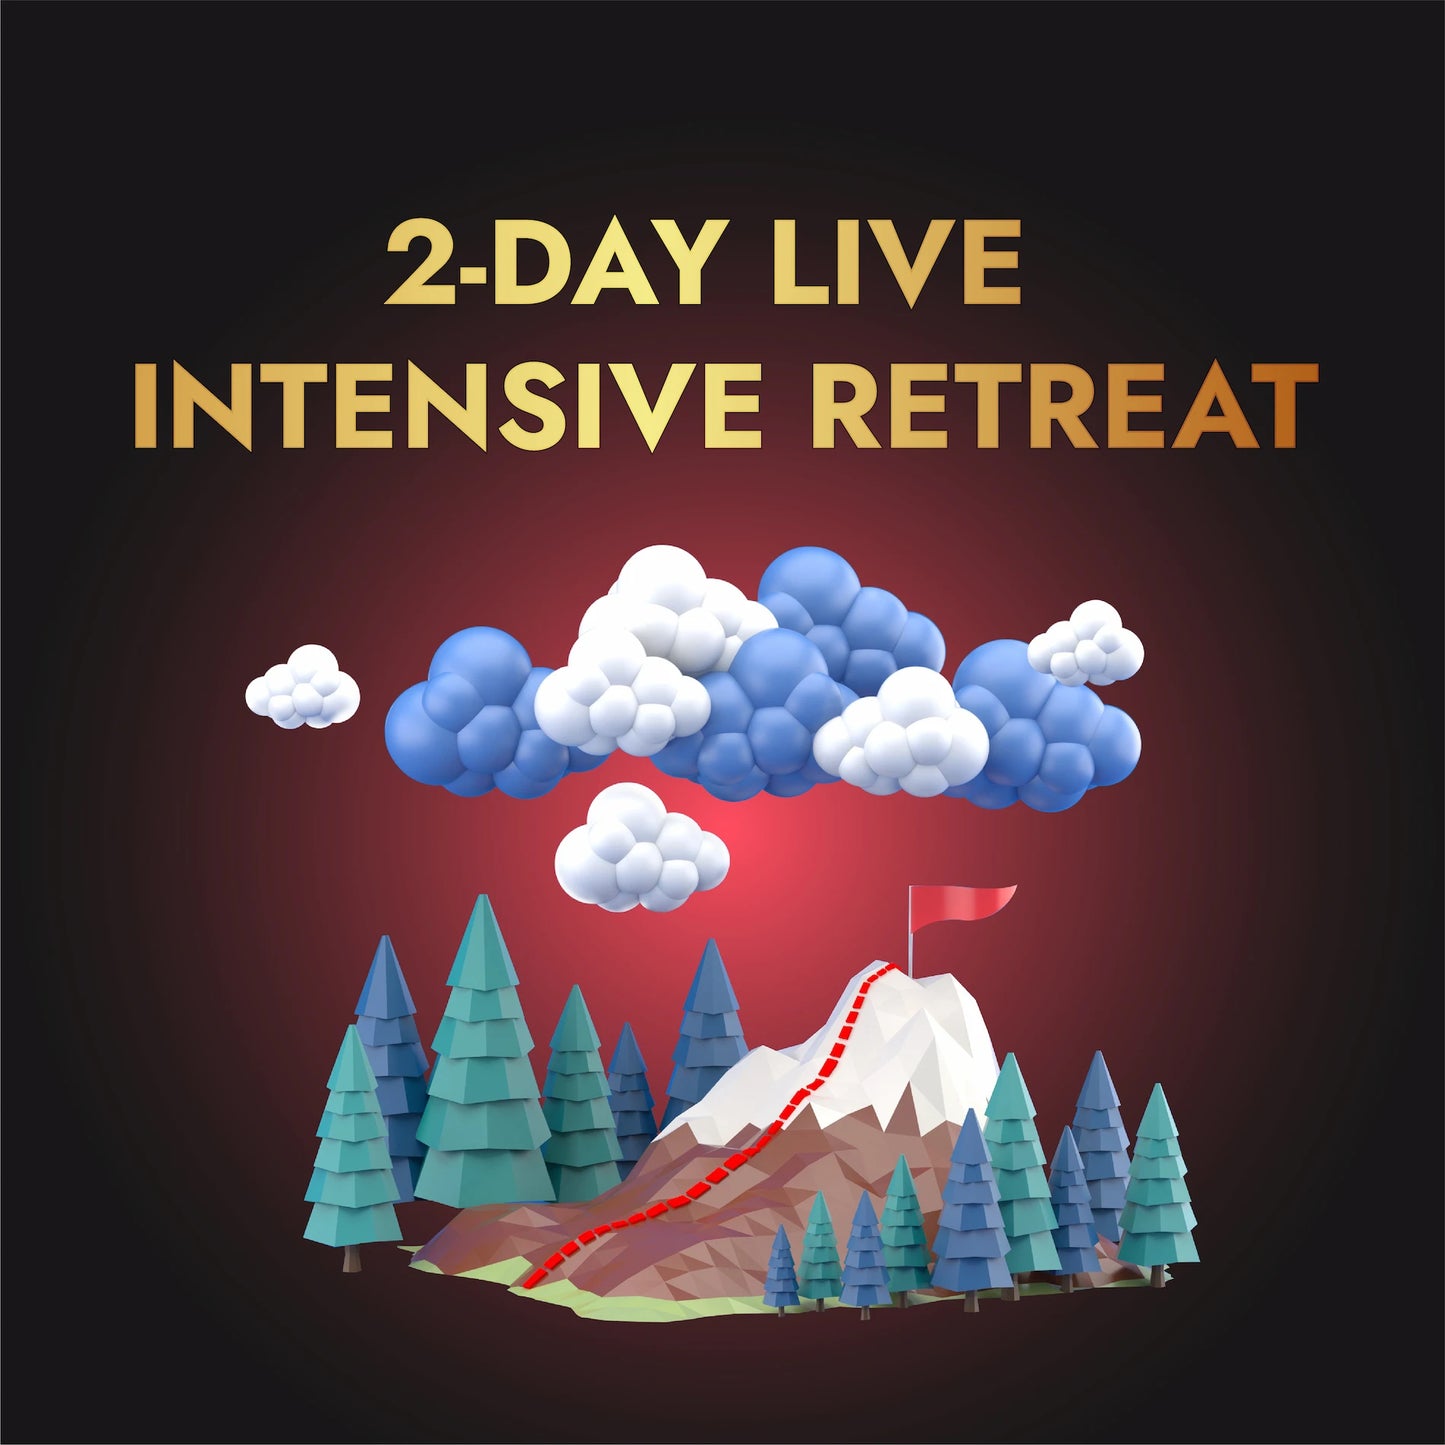 2-Day Live Intensive Retreat